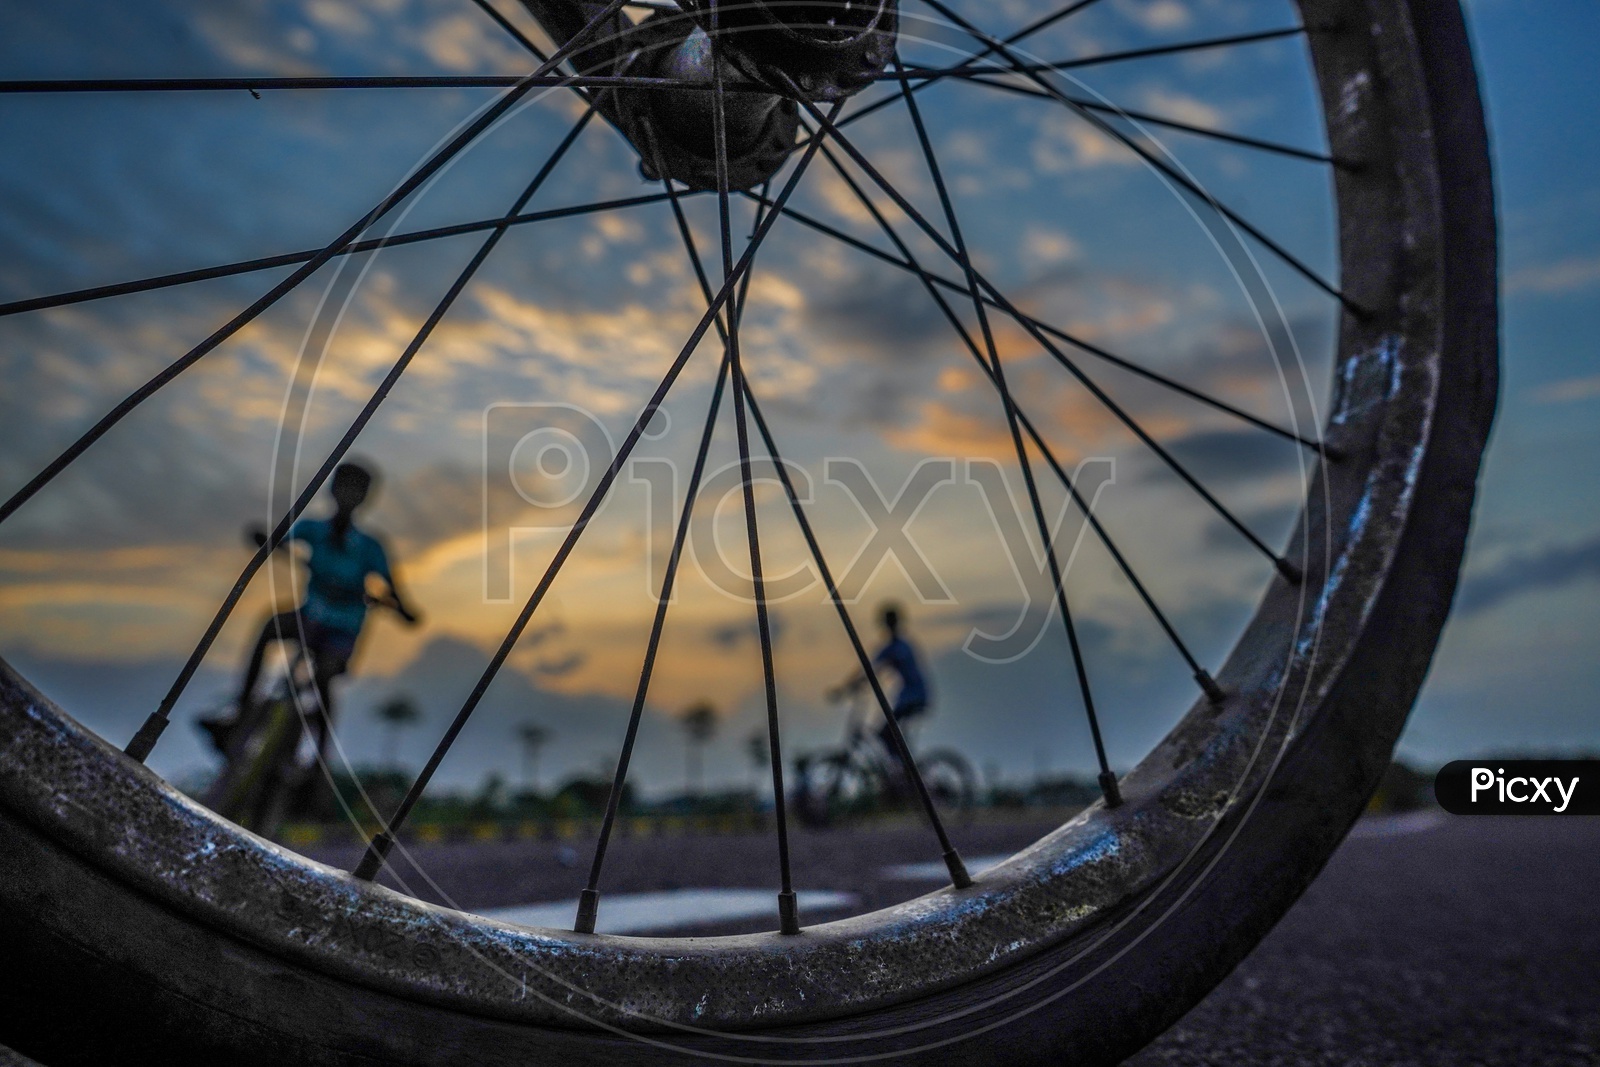 Composition Of Happy Or Joyful Indian Young Boys Performing Bicycle Stunts With Closeup of Tyre With Folks